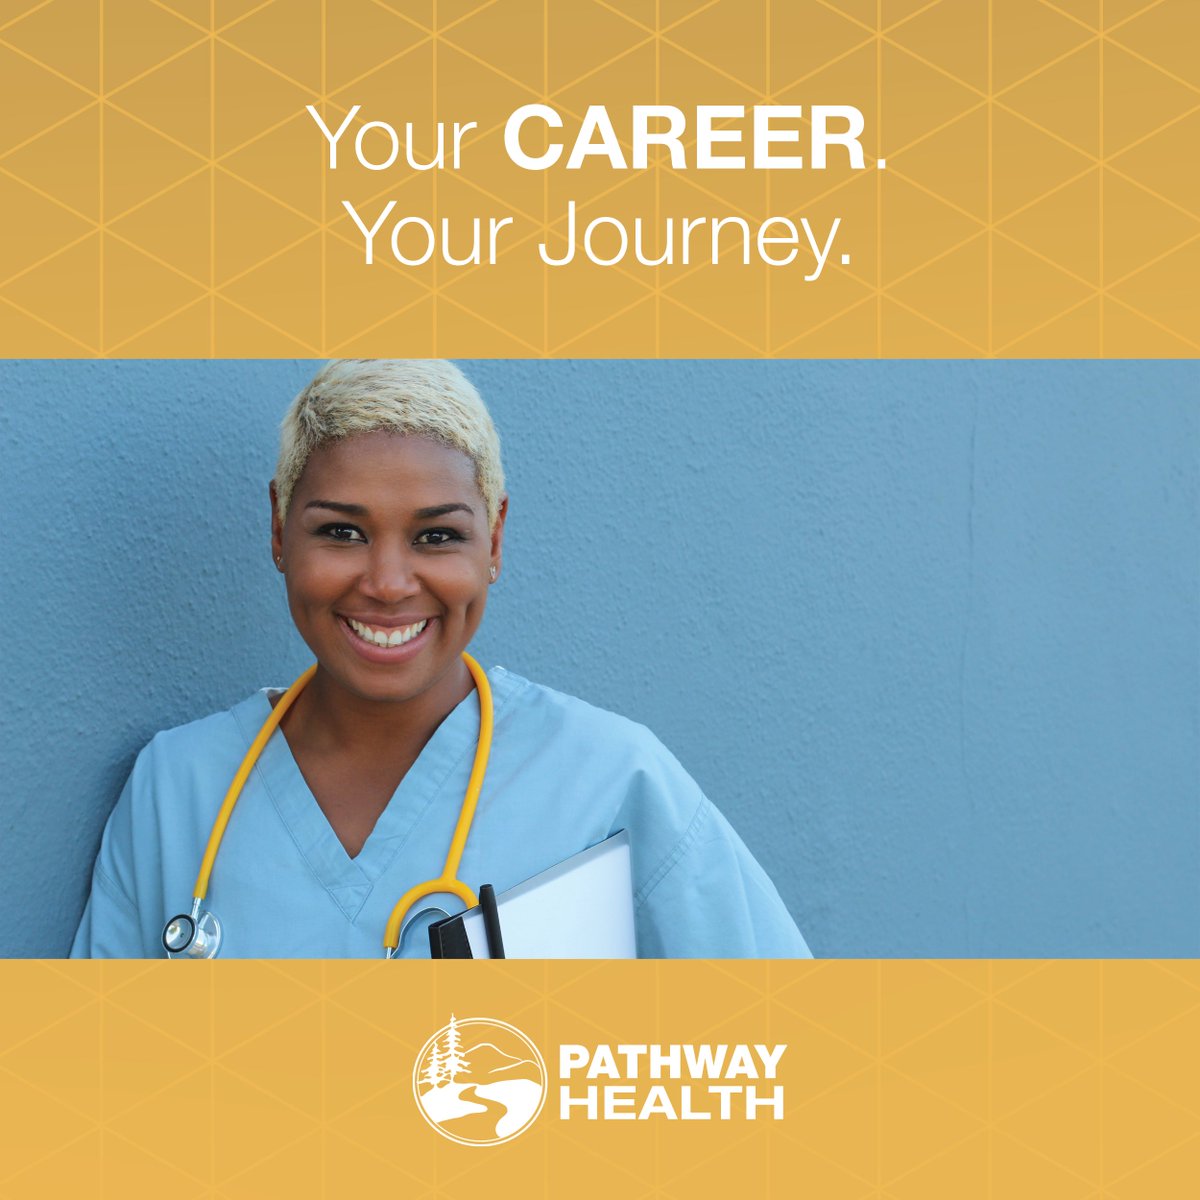 #RNJob in MN—We are #hiring a #DON to perform a wide range of professional consulting services in support of our #LTC clients in the state. This is a flexible project-based role where you will take your nursing career to the next level. Learn more: ow.ly/vs1O50Nvka5